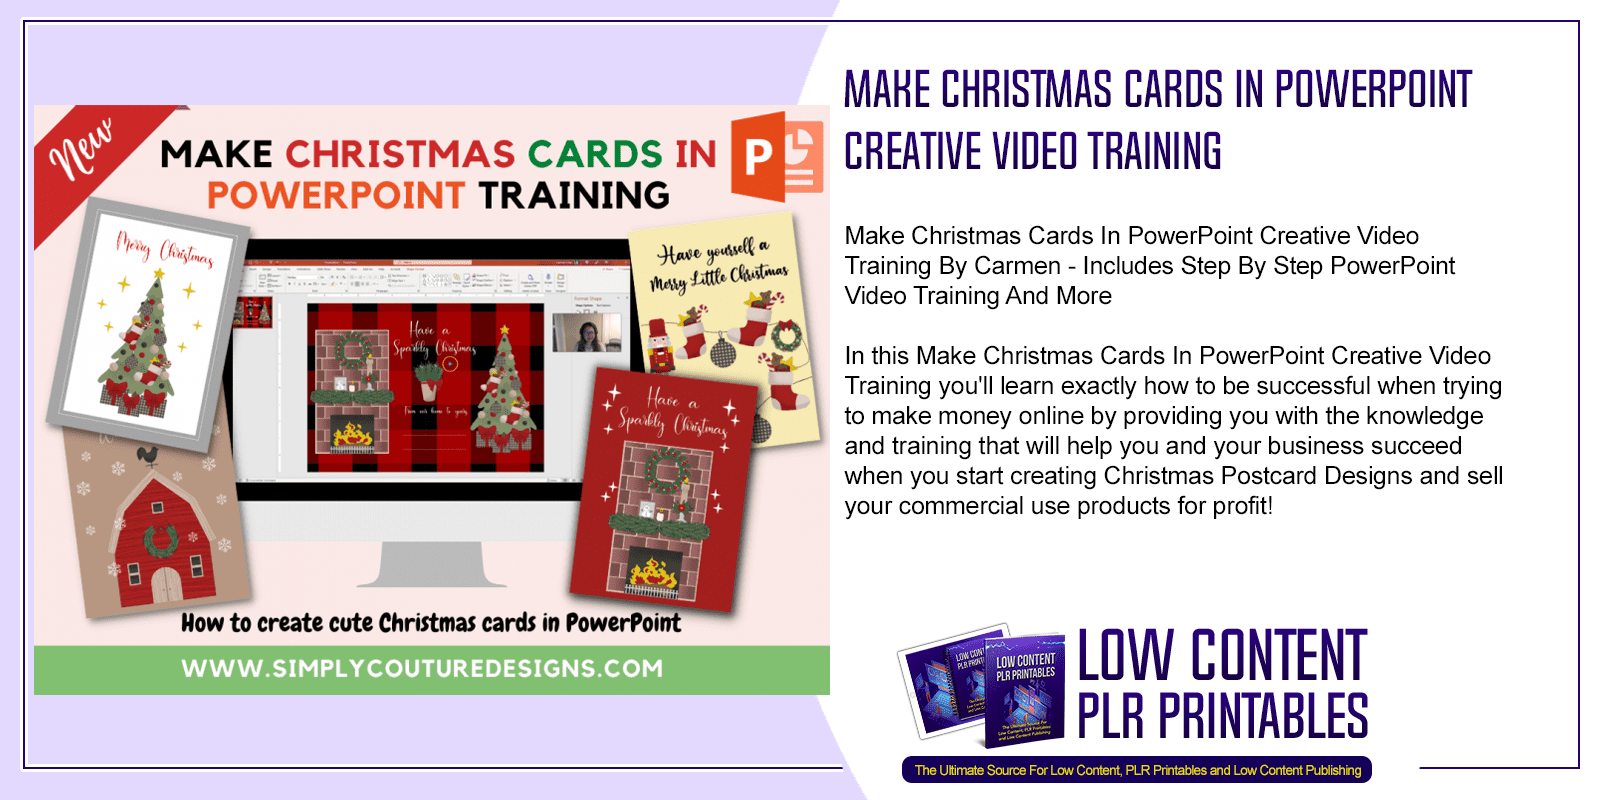 Make Christmas Cards In PowerPoint Creative Video Training